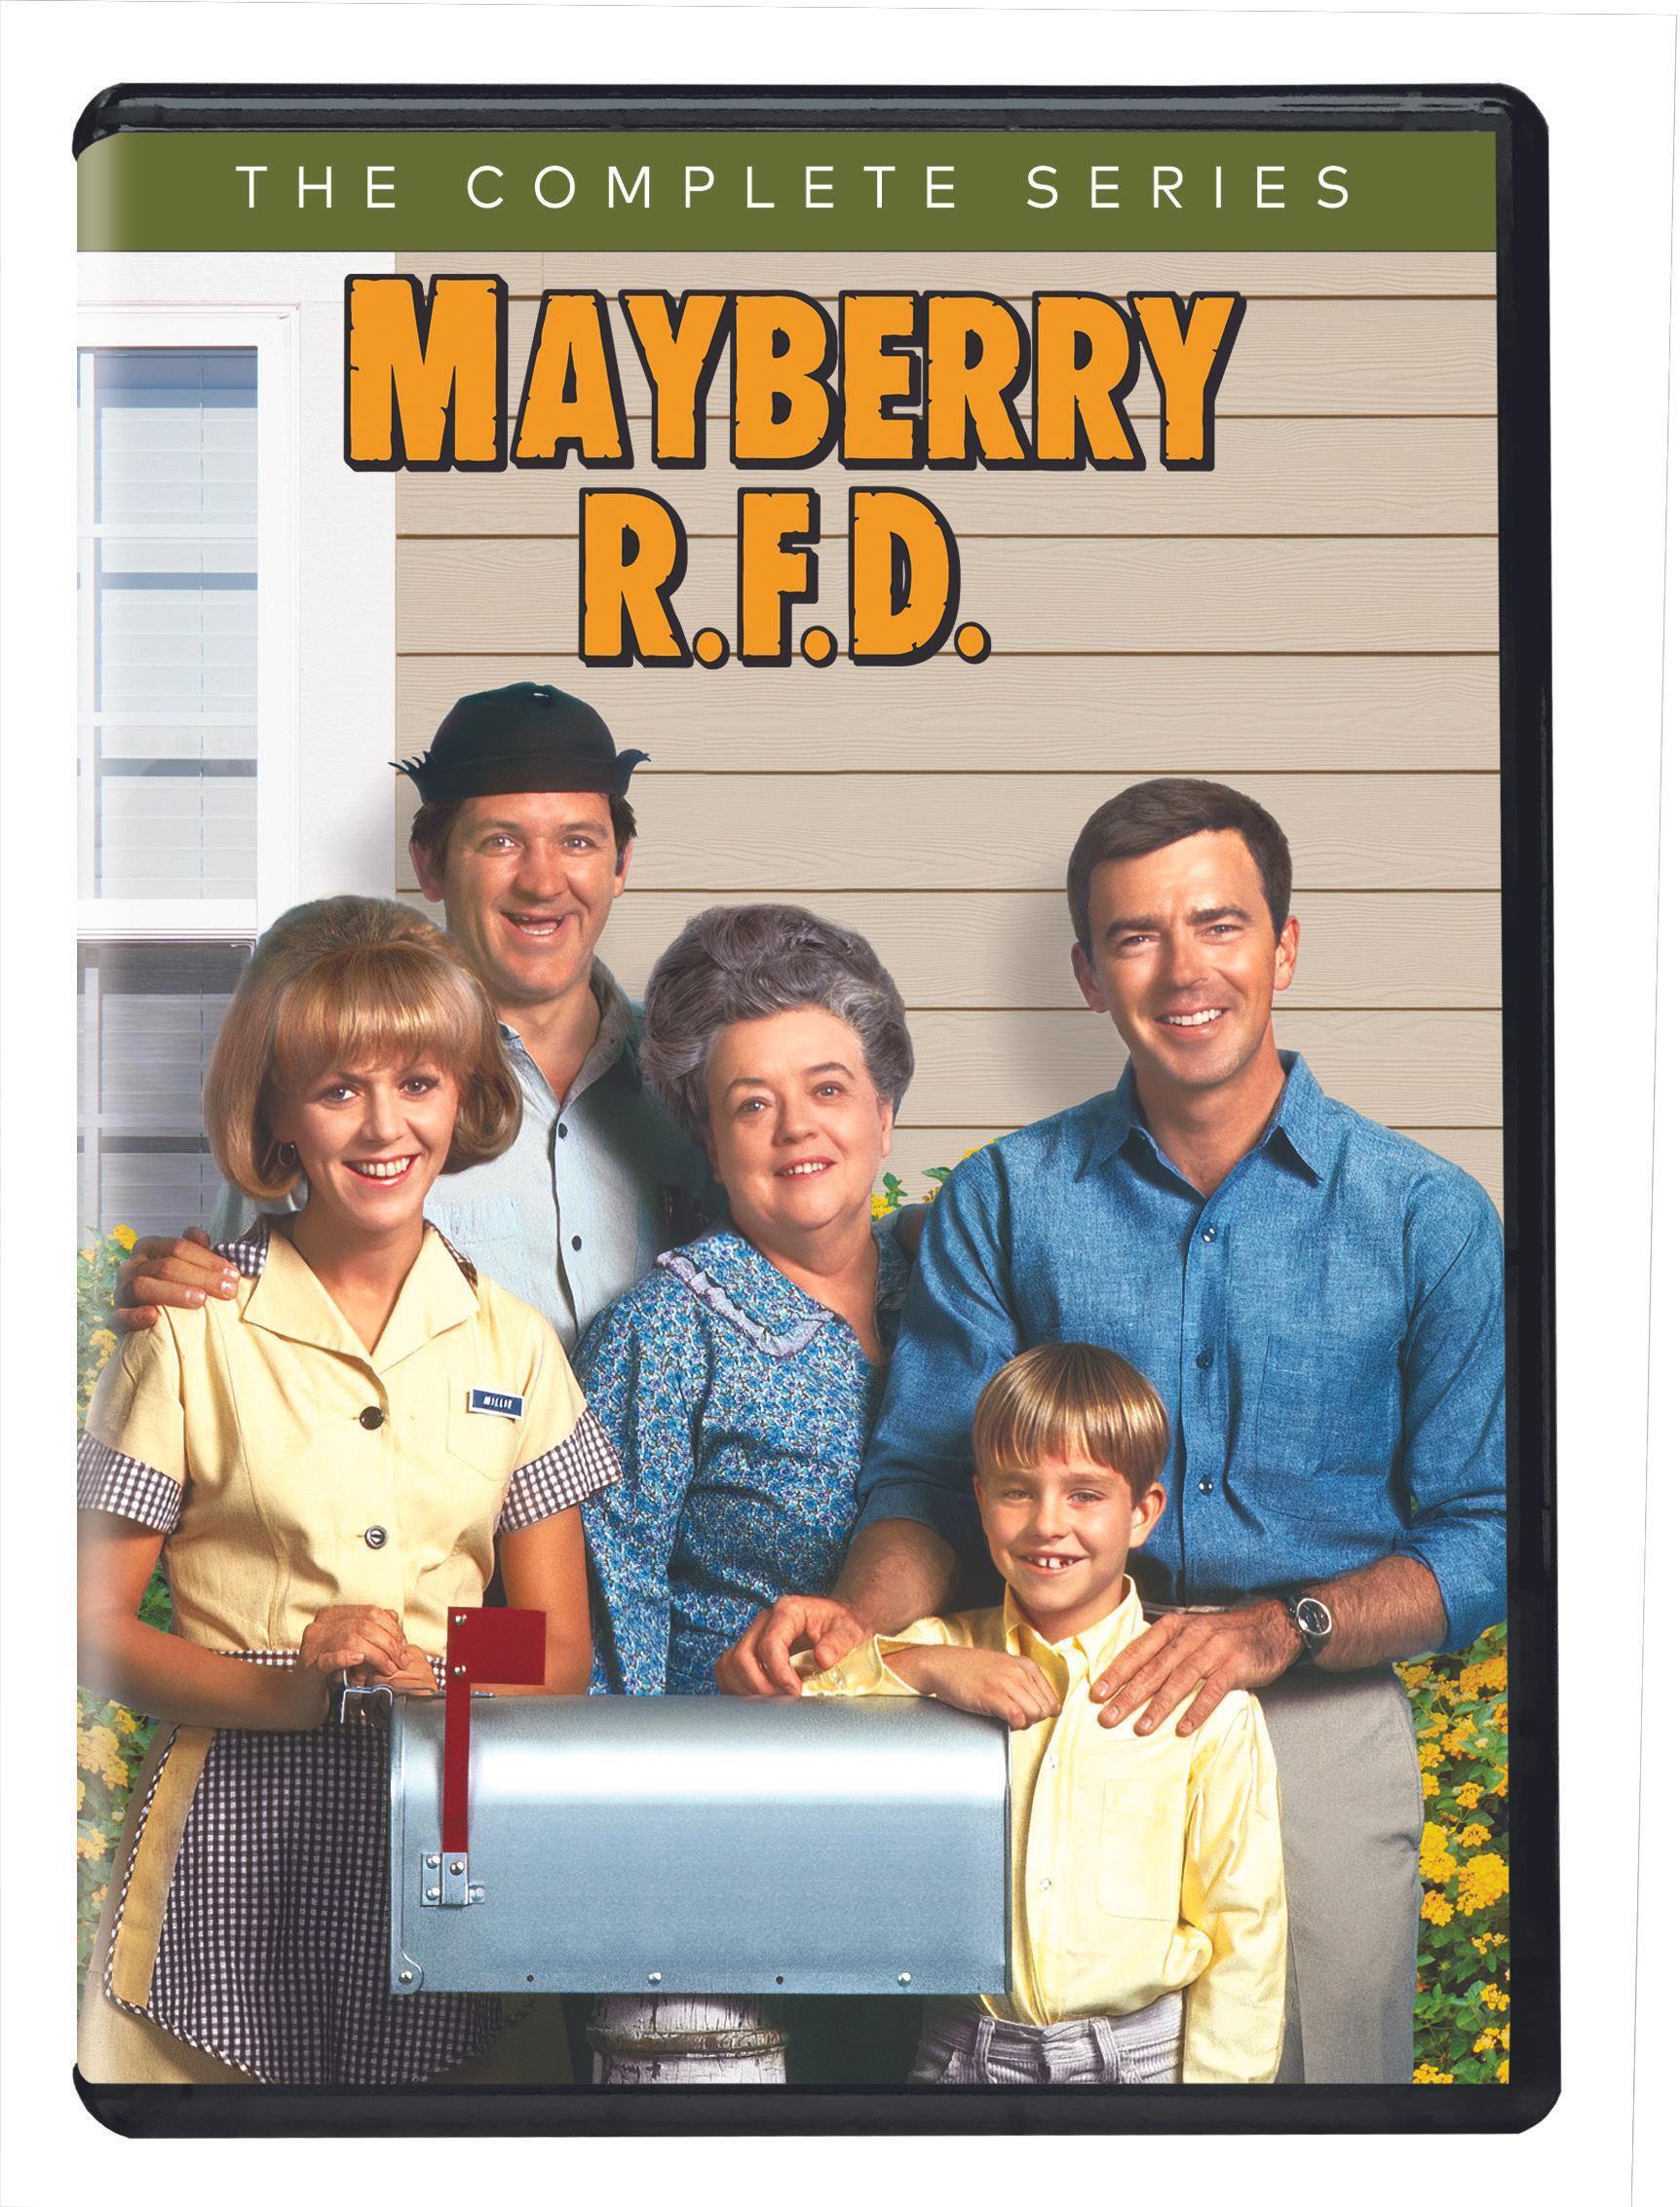 what does rfd stand for in mayberry r.f.d.